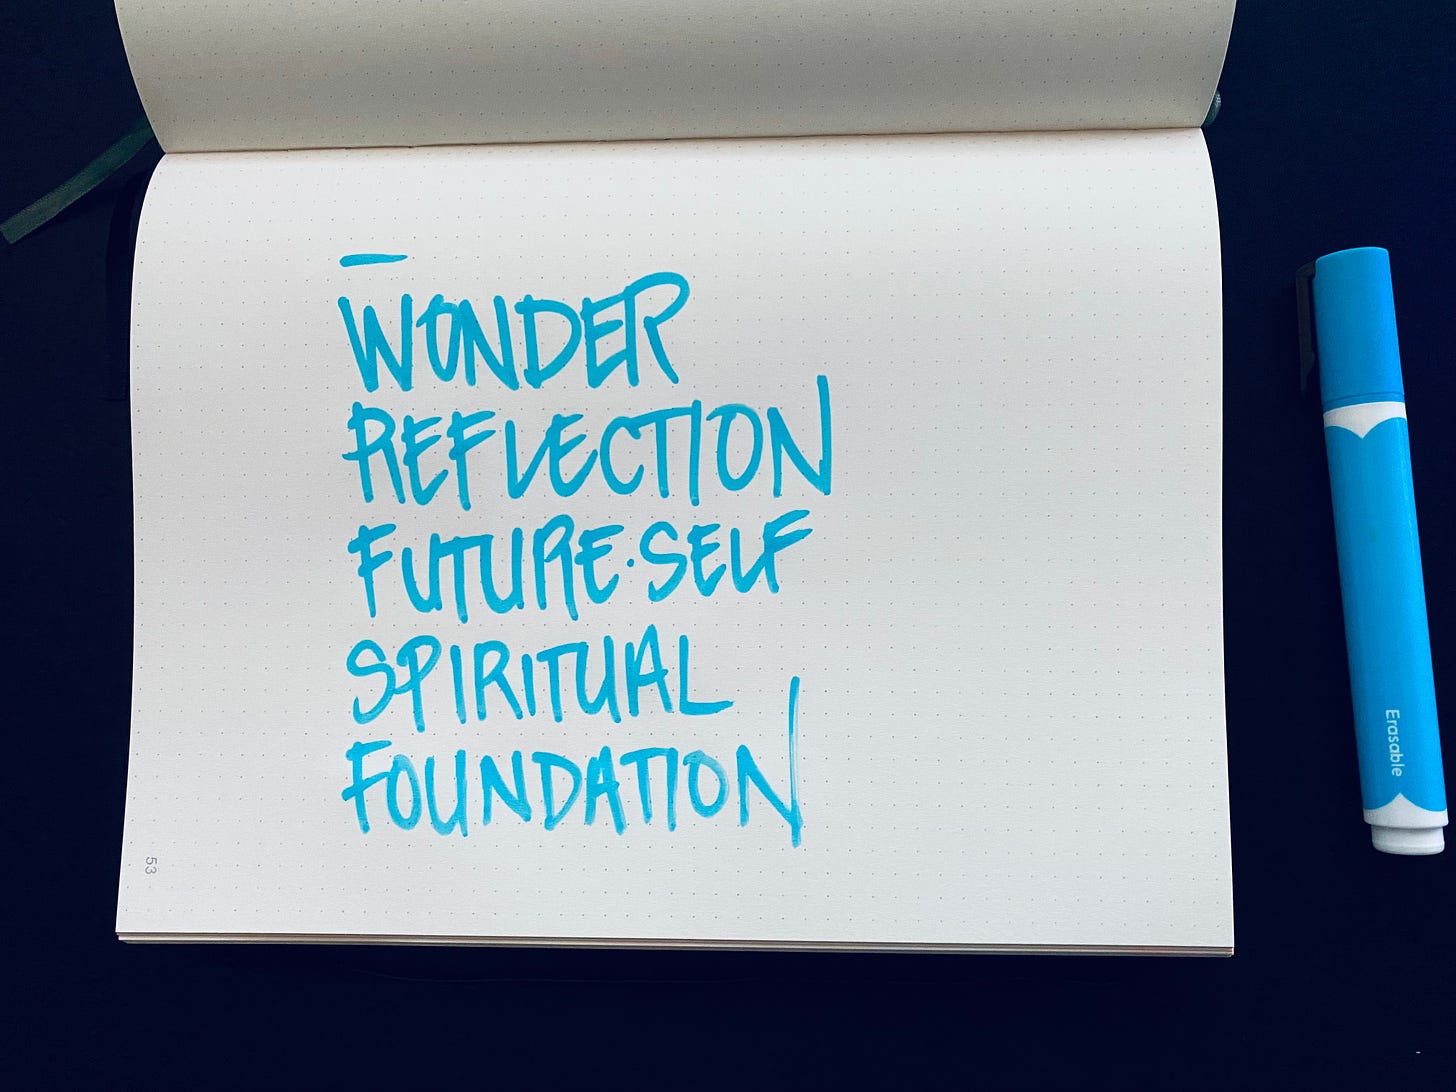 The words "wonder", "reflection", "future self", "spiritual", and "foundation", written in a notebook with an blue paint marker